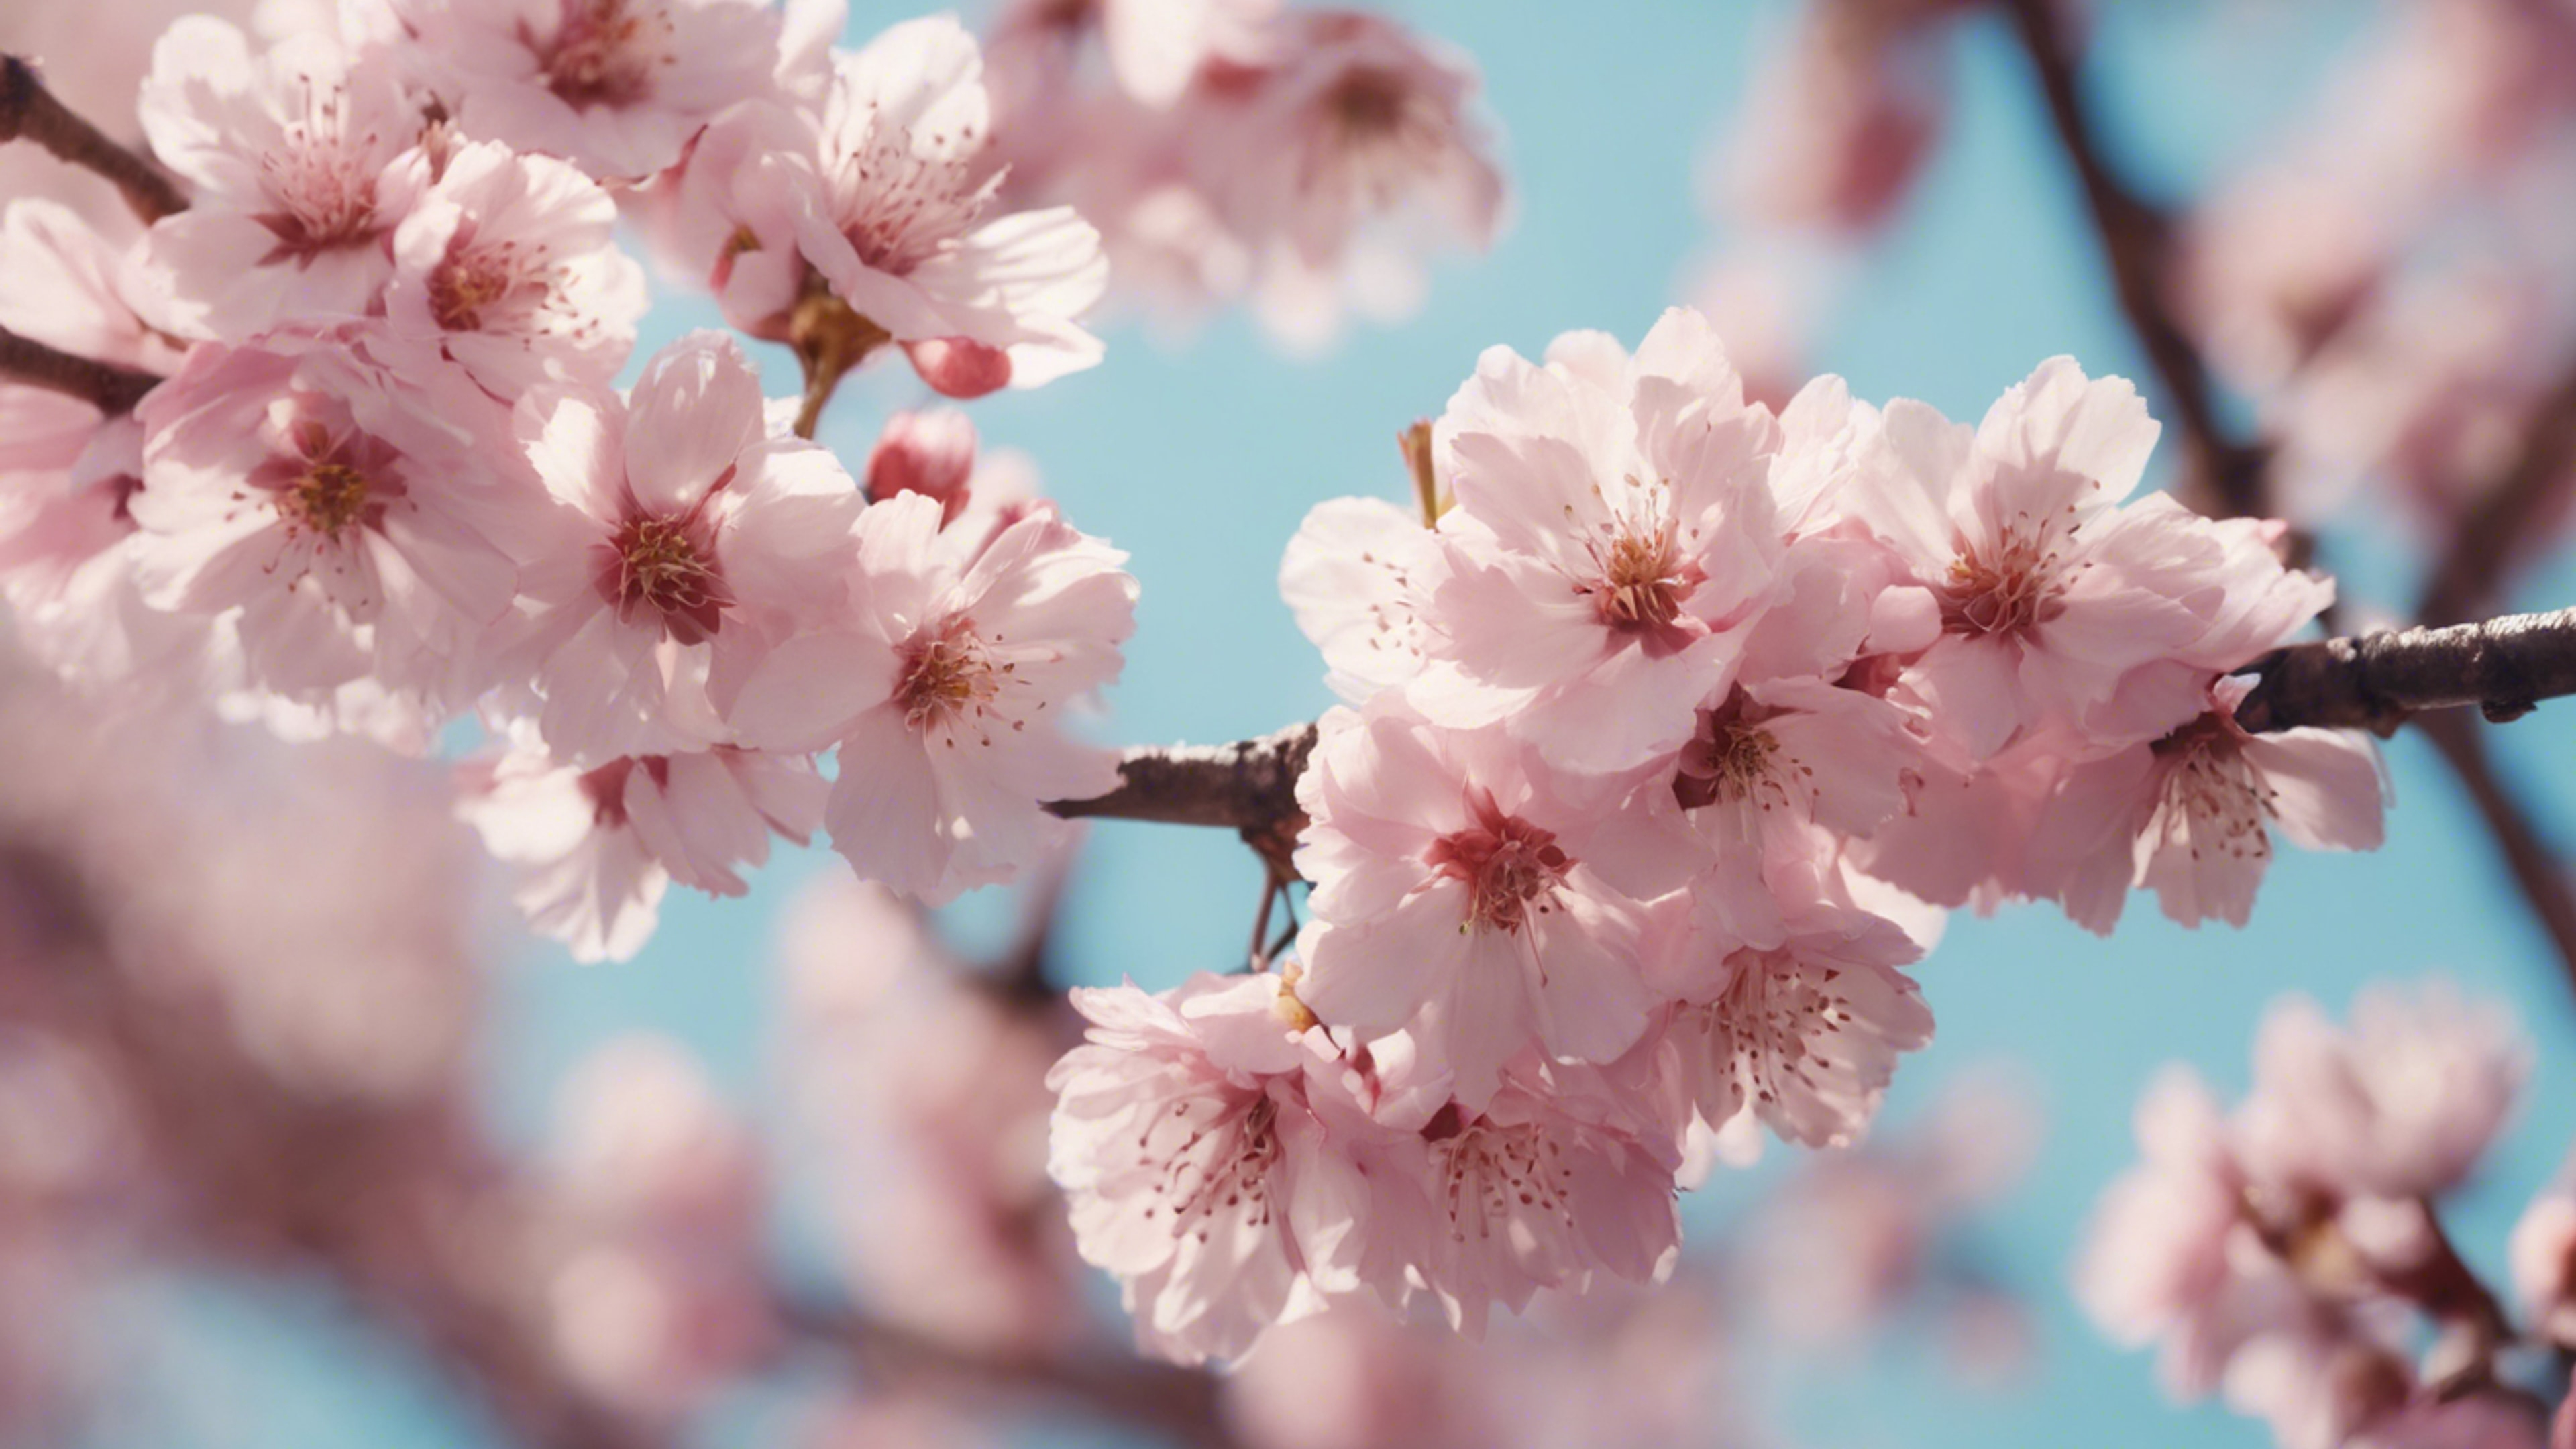 A vibrant scene of pastel pink cherry blossoms falling gently. Tapetai[c8bce7433f184c22a8f5]